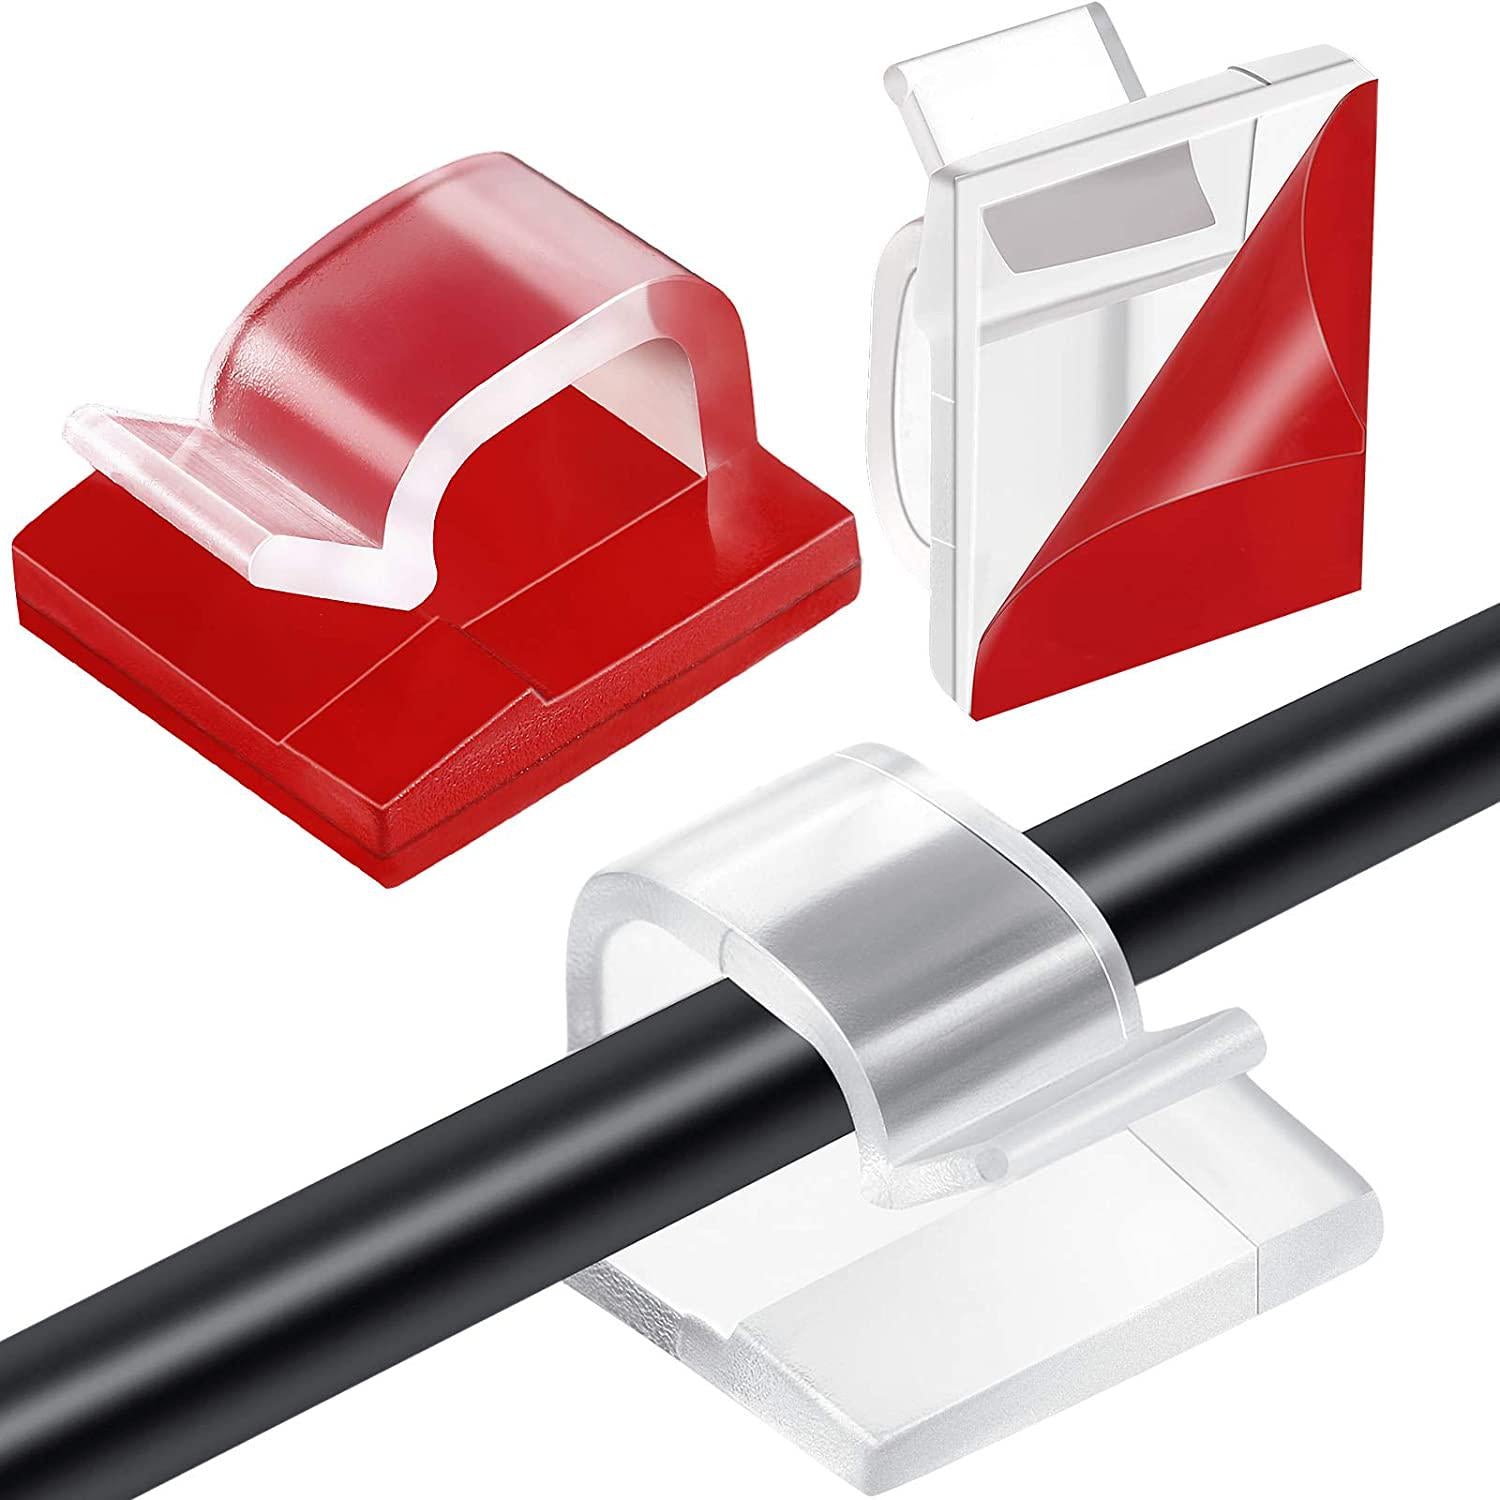  Cable Clips with Strong Self-Adhesive, XIAOXI R Shape